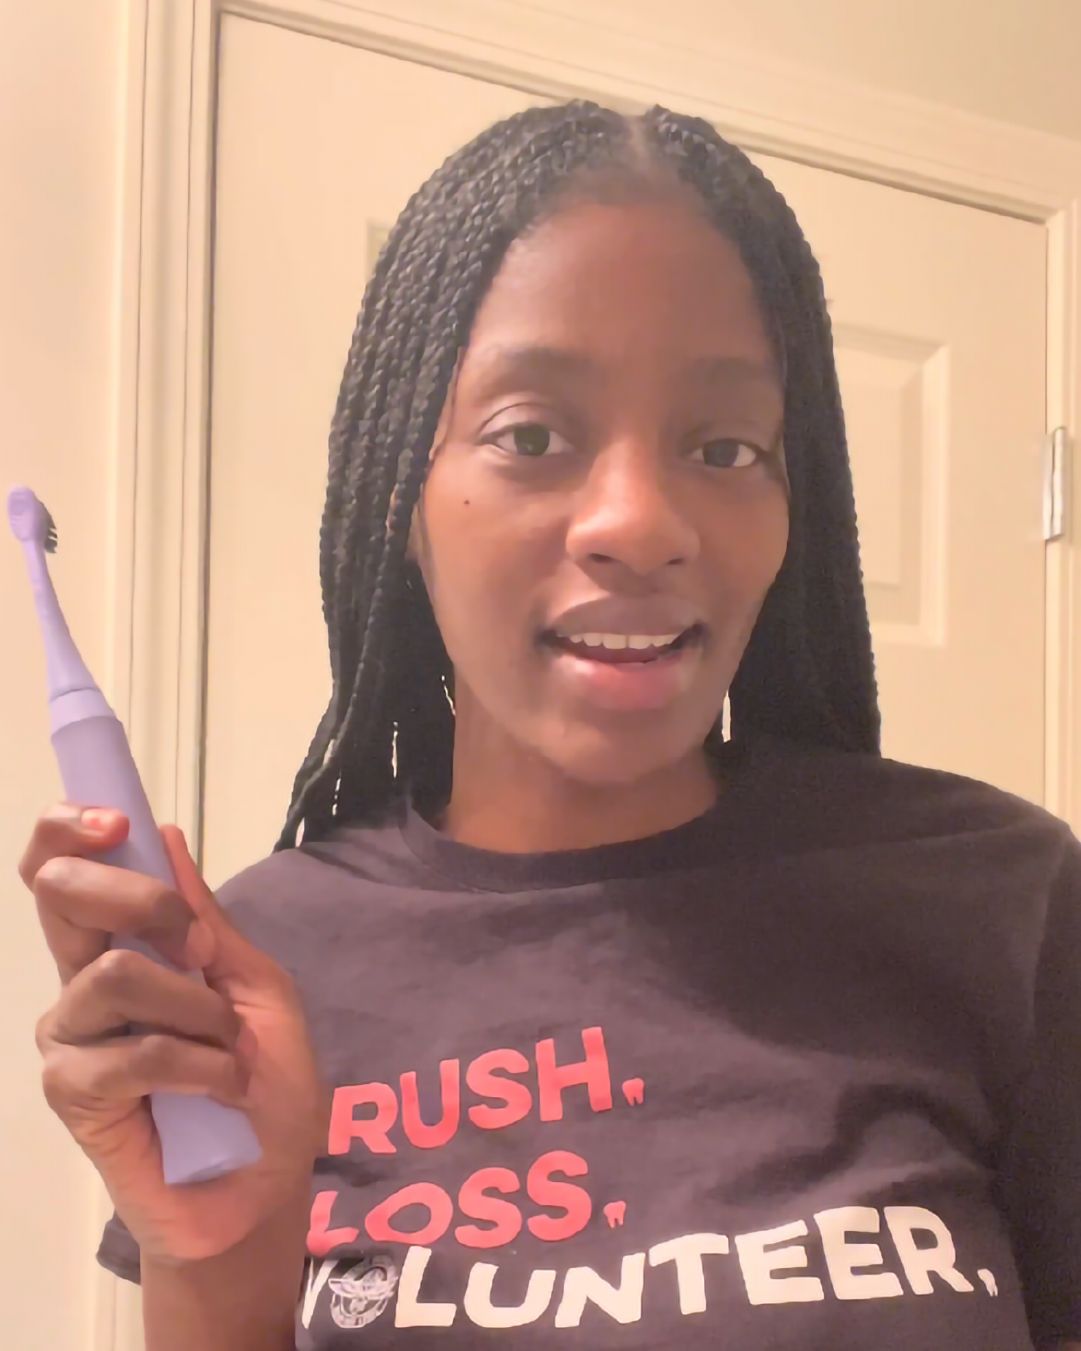 A person holding an electric toothbrush and wearing a t-shirt with the text "rush, loss, volunteer.